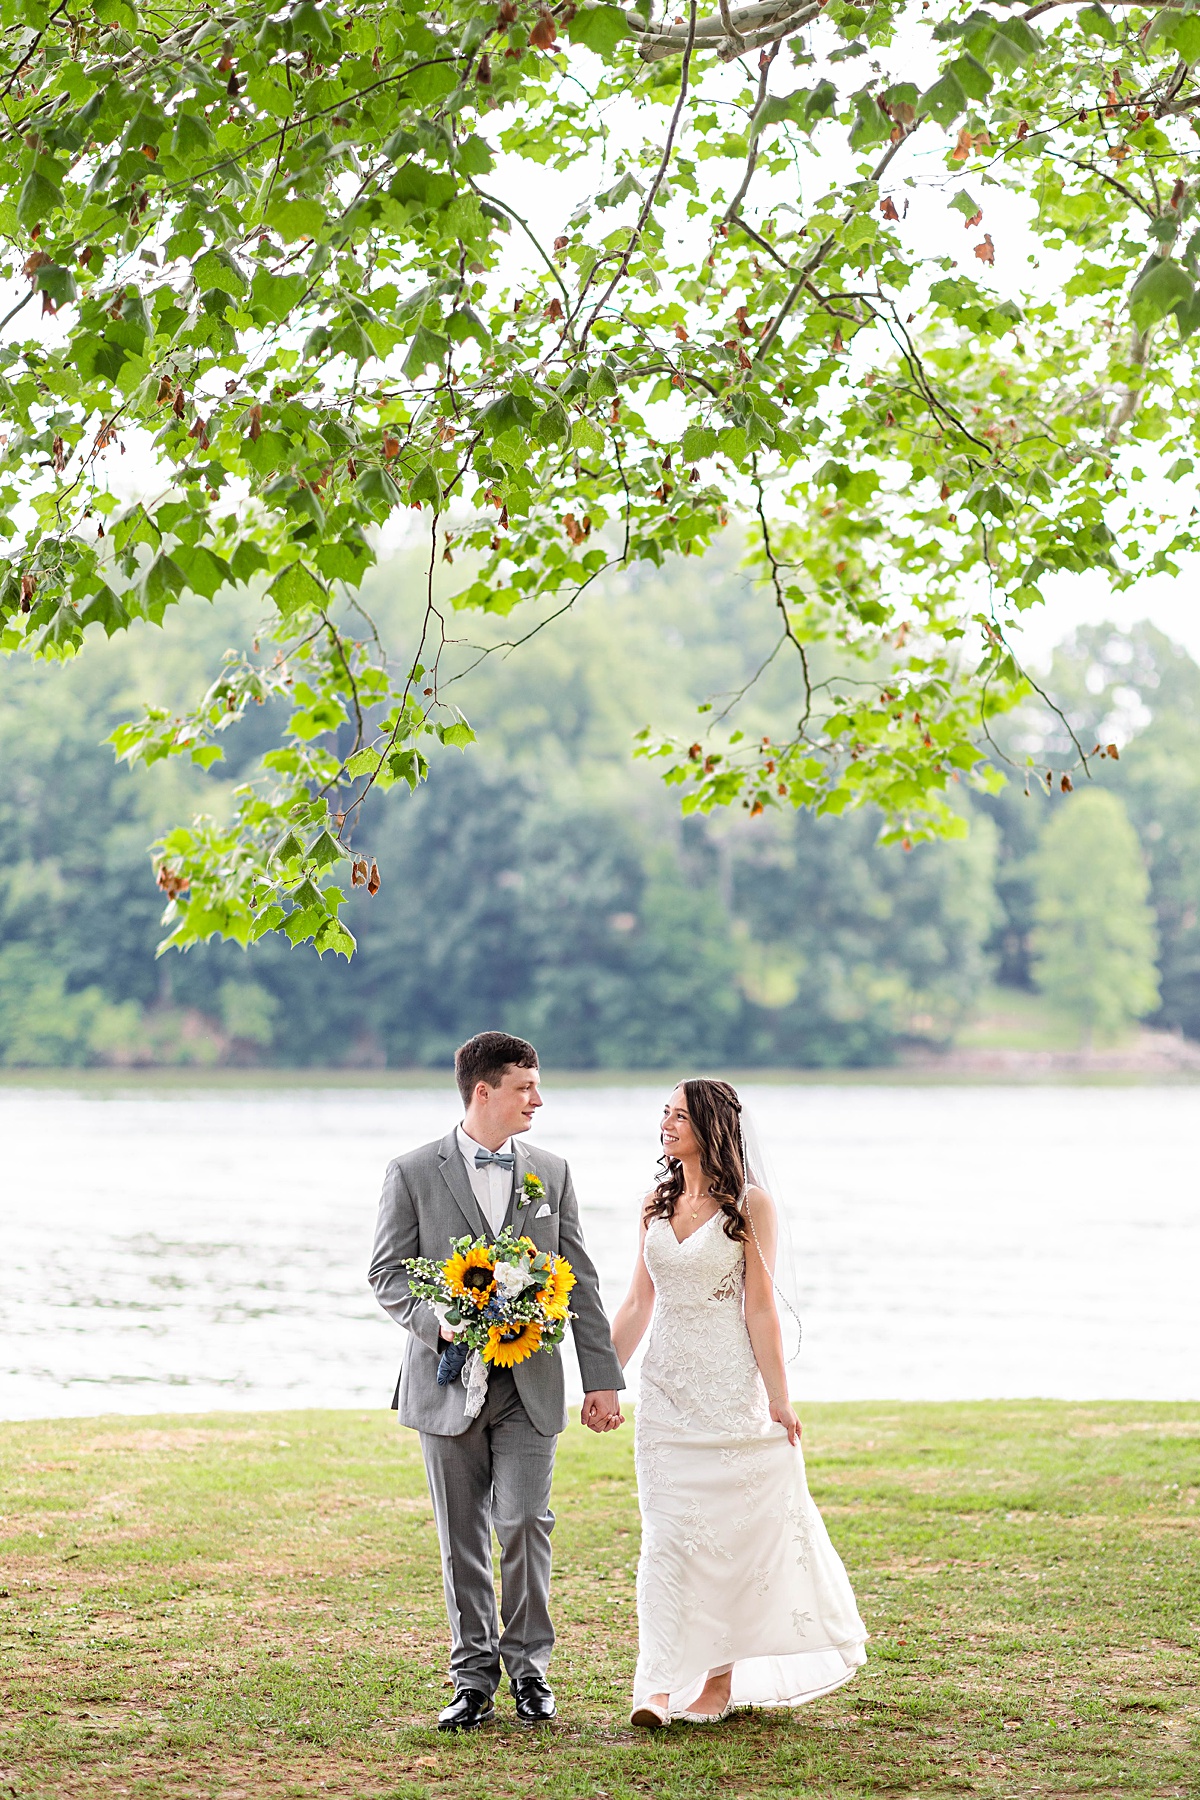 This summer lake wedding at Smith Mountain Lake is full of sweet first looks, a wedding full of traditions, and a surprise exit into the sunset!